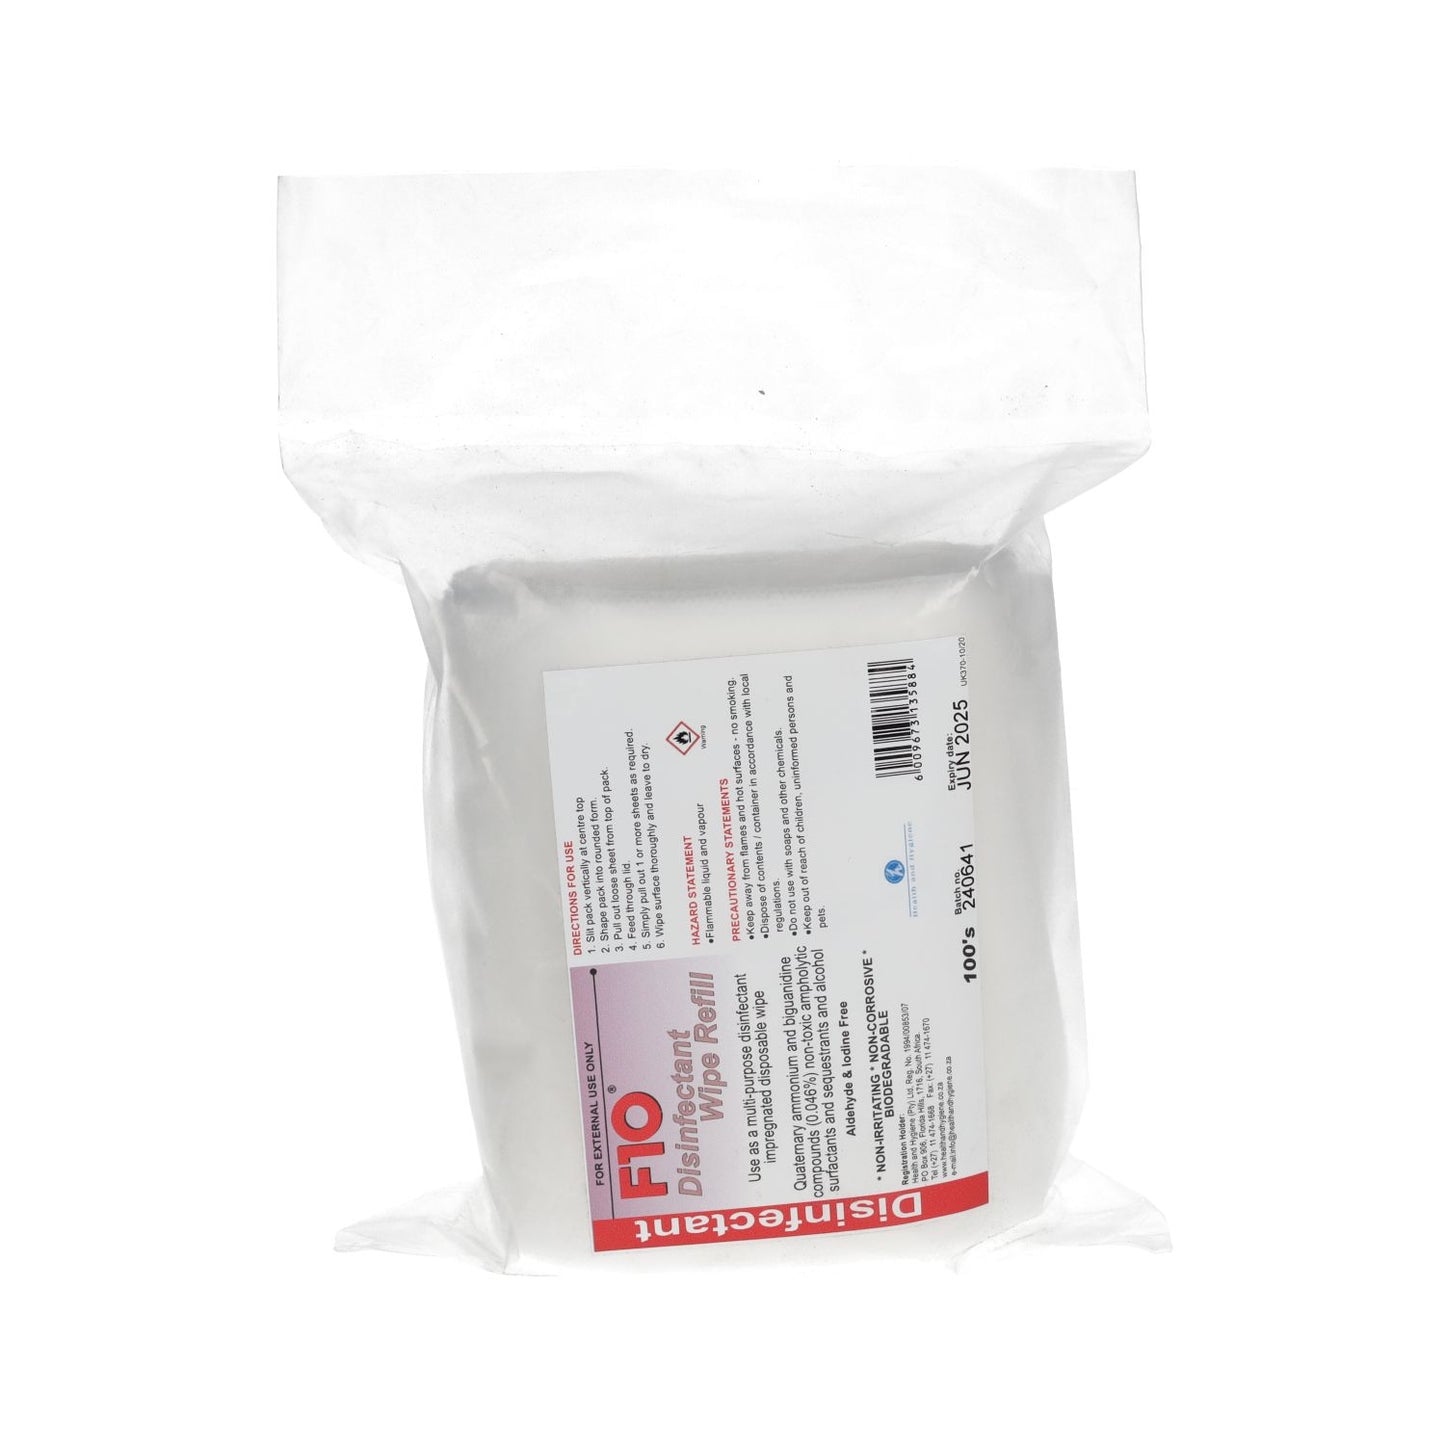 F10 Disinfectant Wipes (dispensing pack 100)